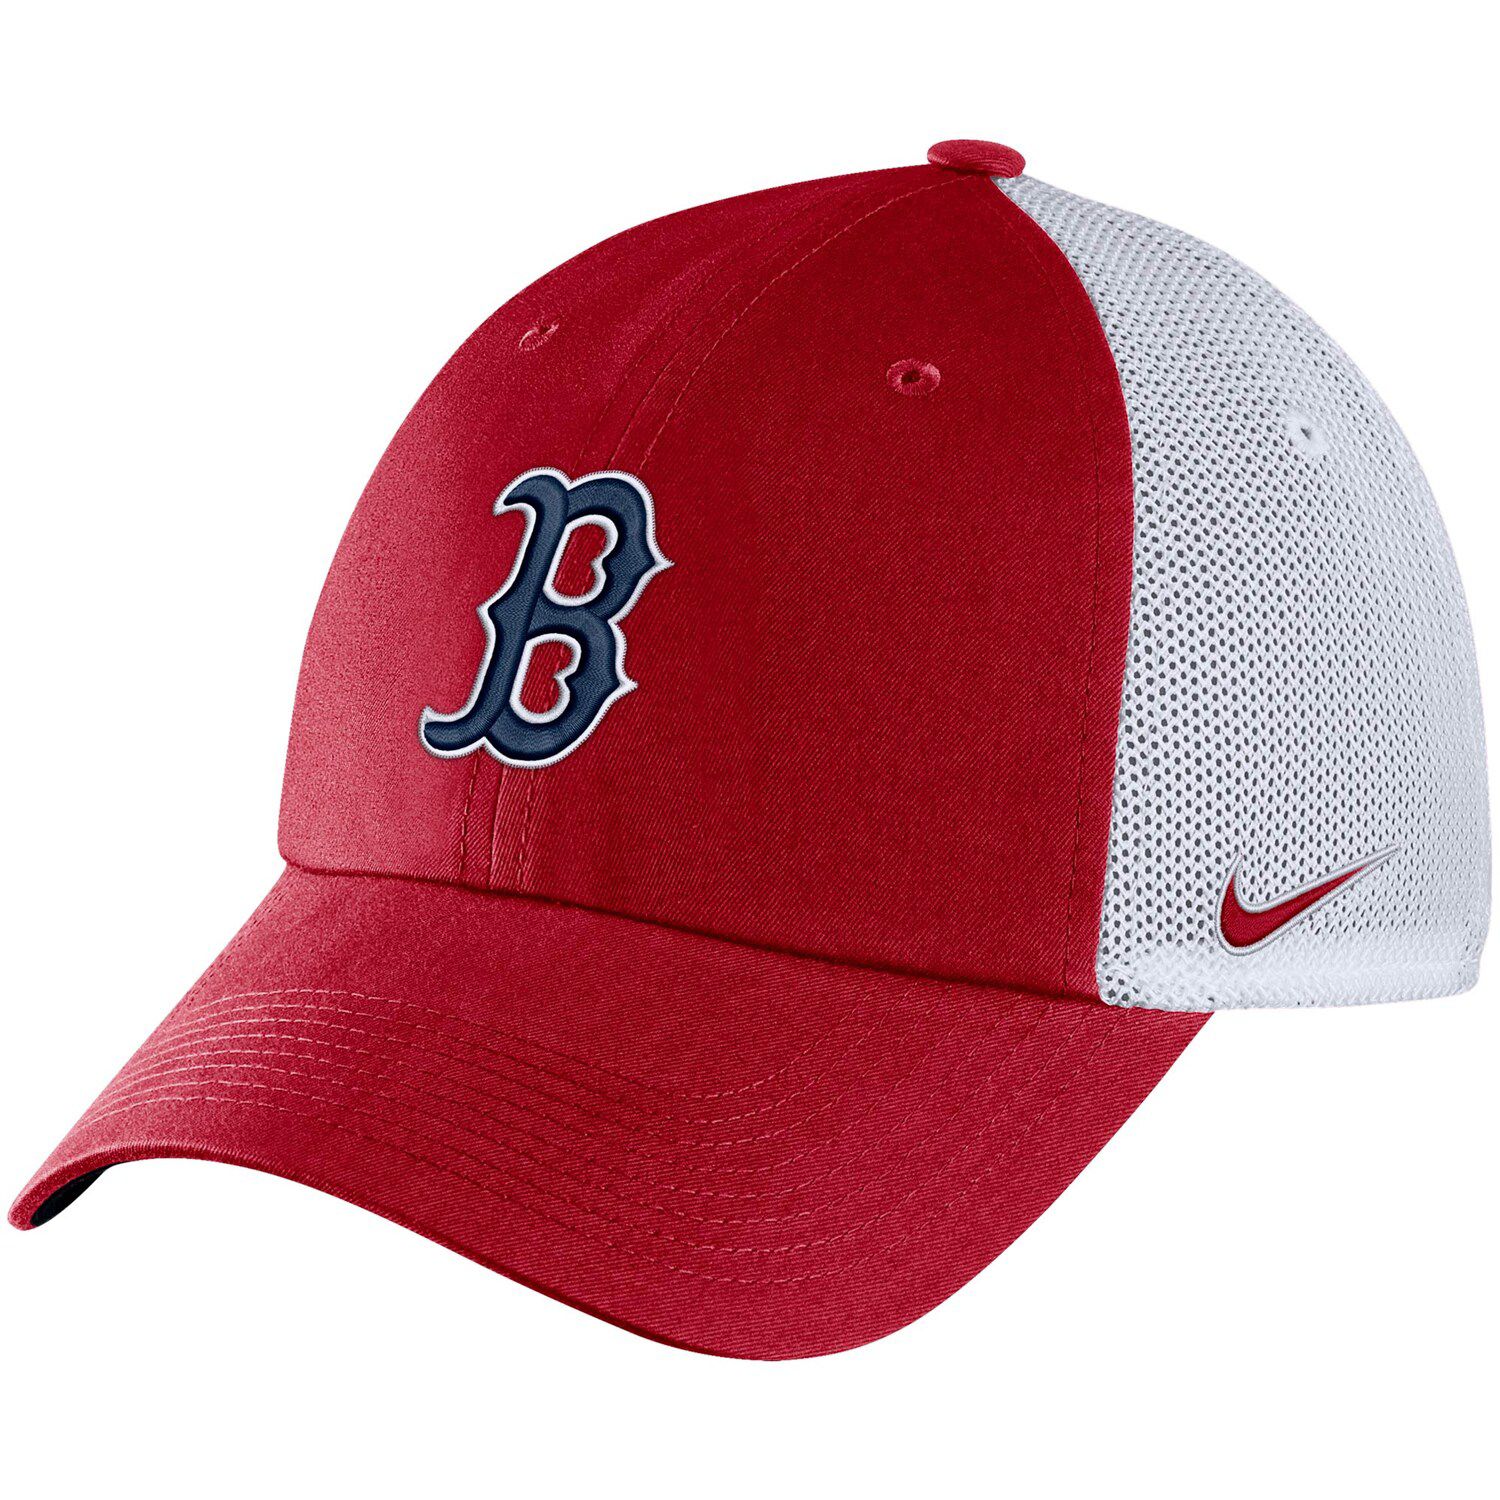 nike red sox hat